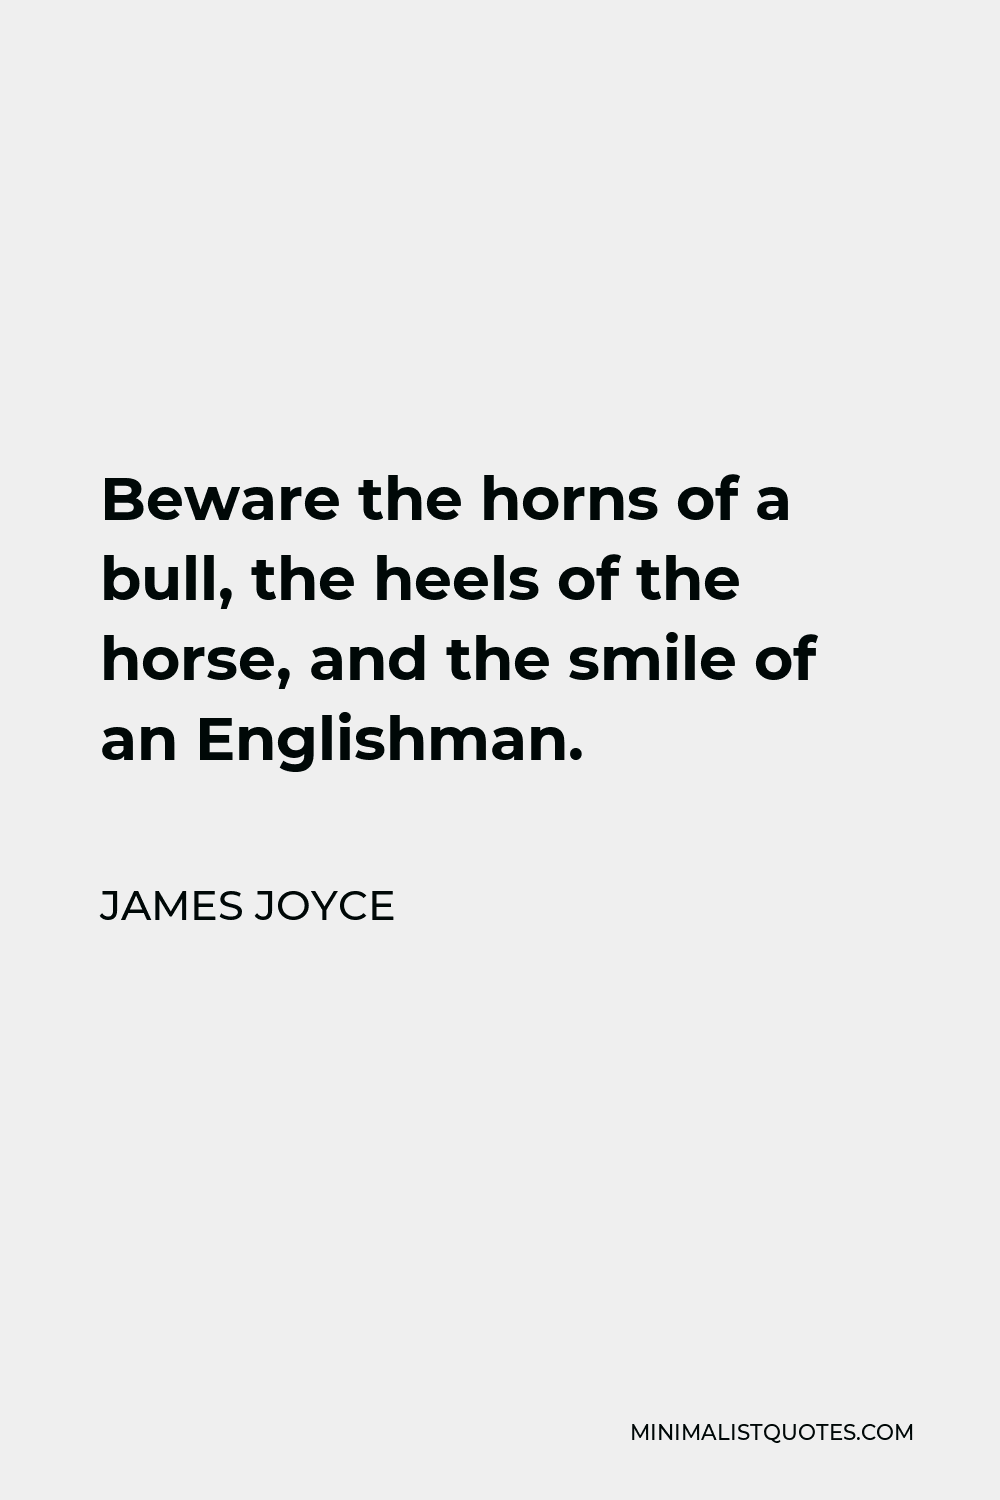 James Joyce Quote - Beware the horns of a bull, the heels of the horse, and the smile of an Englishman.